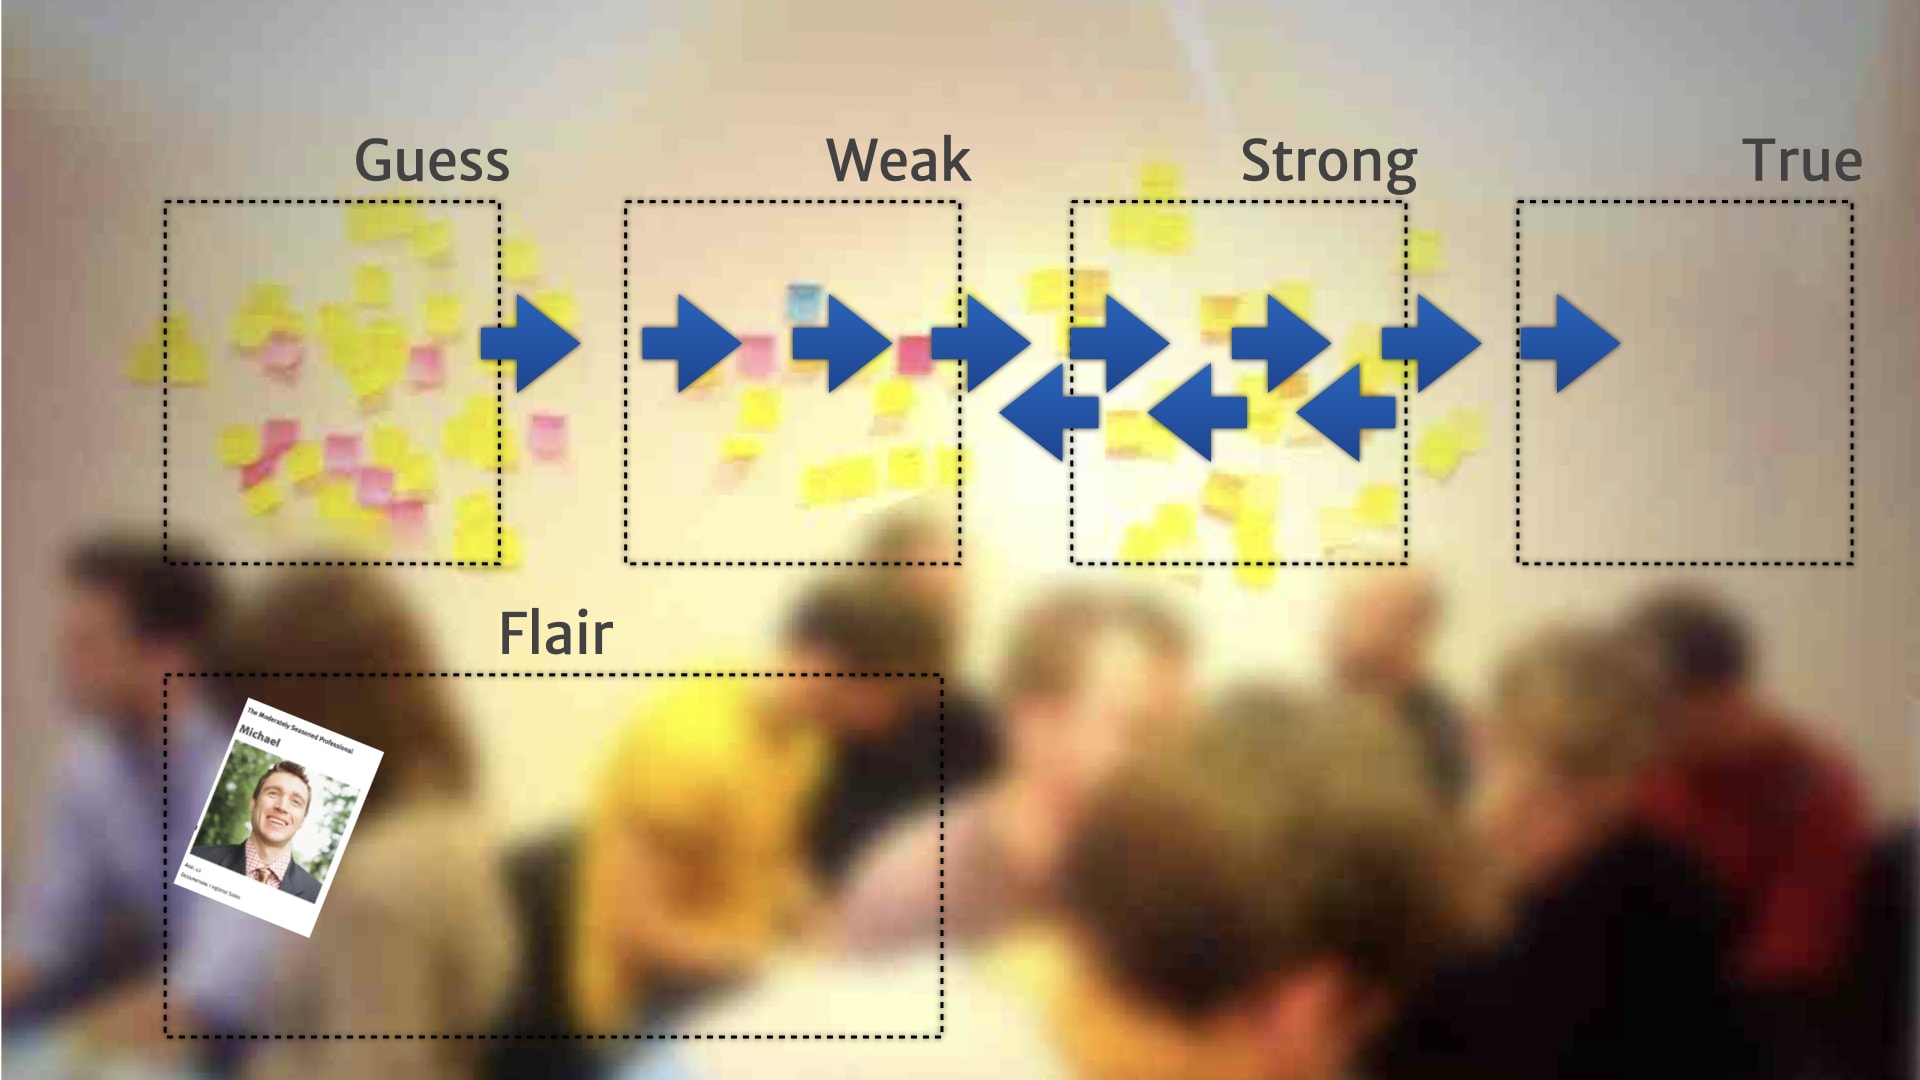 A picture of a wall of post-it notes divided into four categories running left to right (Guess, Weak, Strong, and True). Many short blue arrows illustrate rapid transitions between the sections.